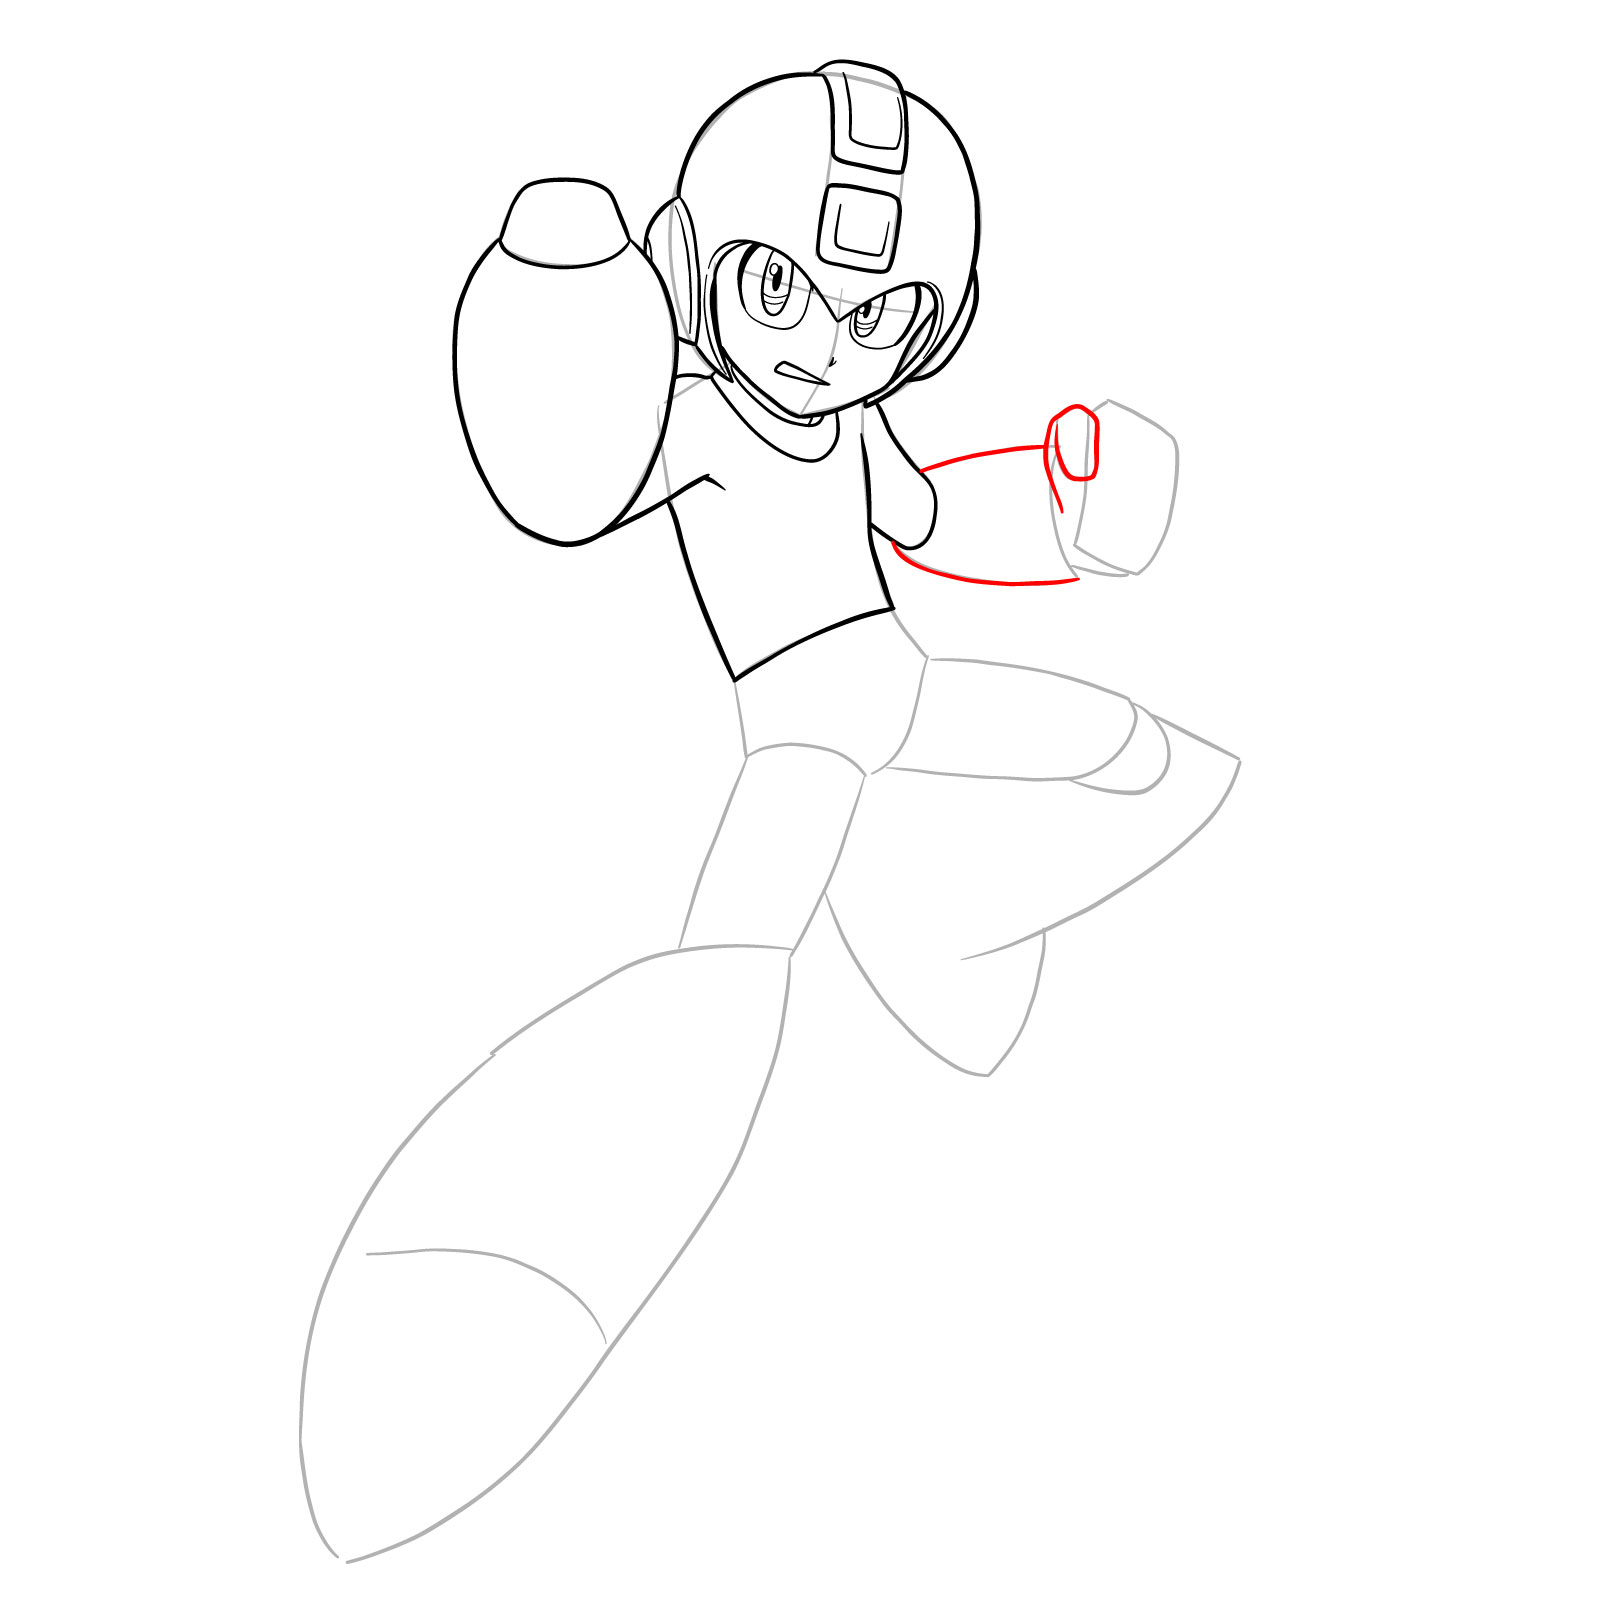 How to draw Mega Man from the 11th game - step 18